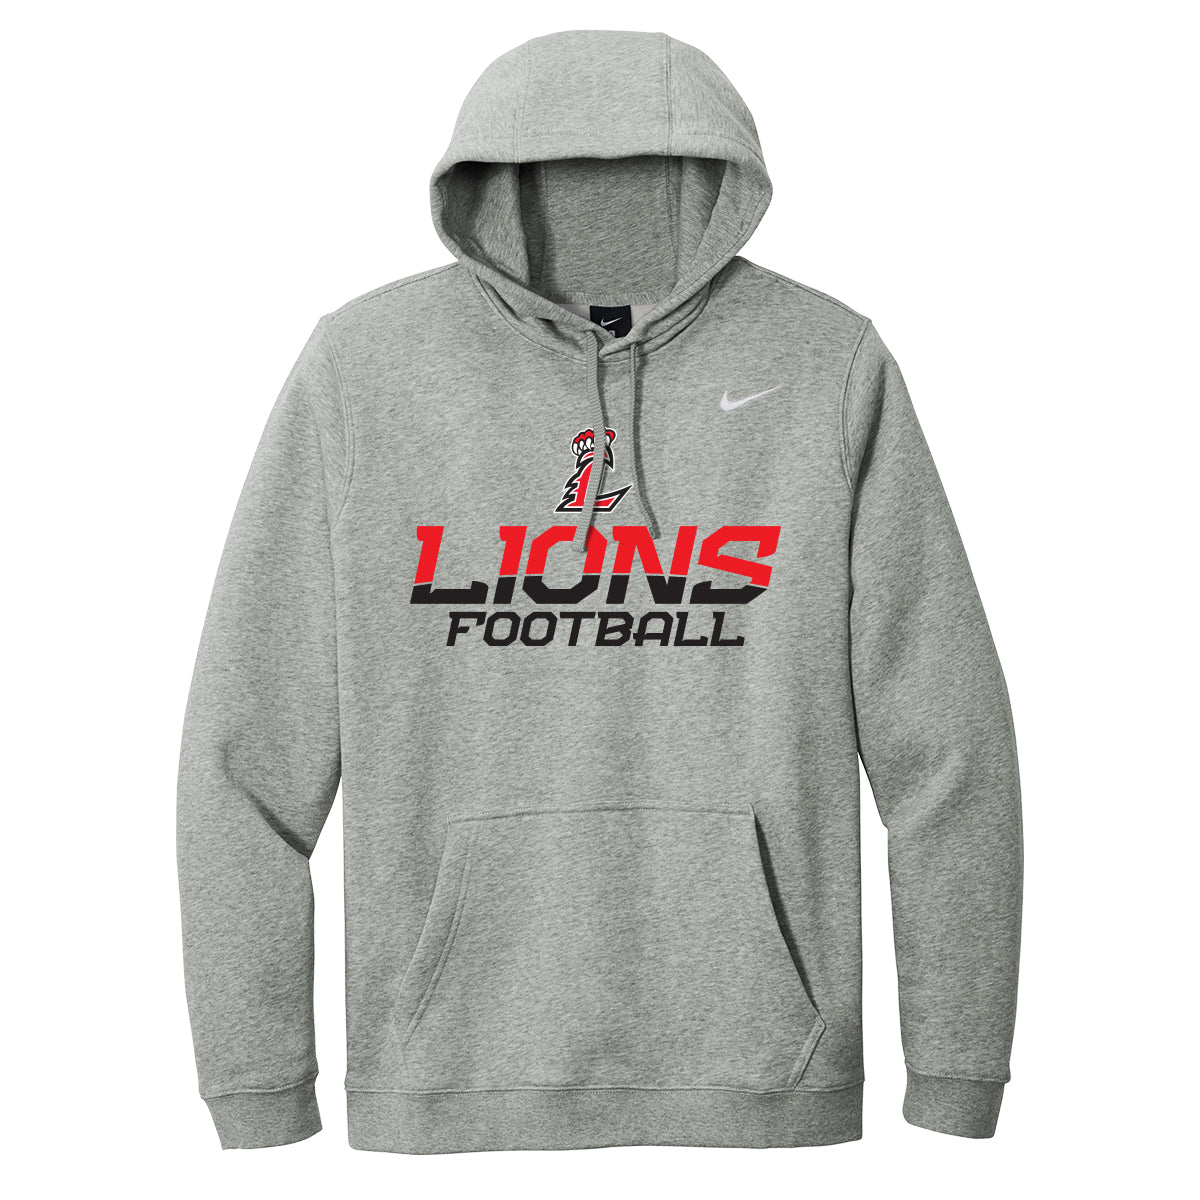 Lions Football (two color) Nike Hoodie